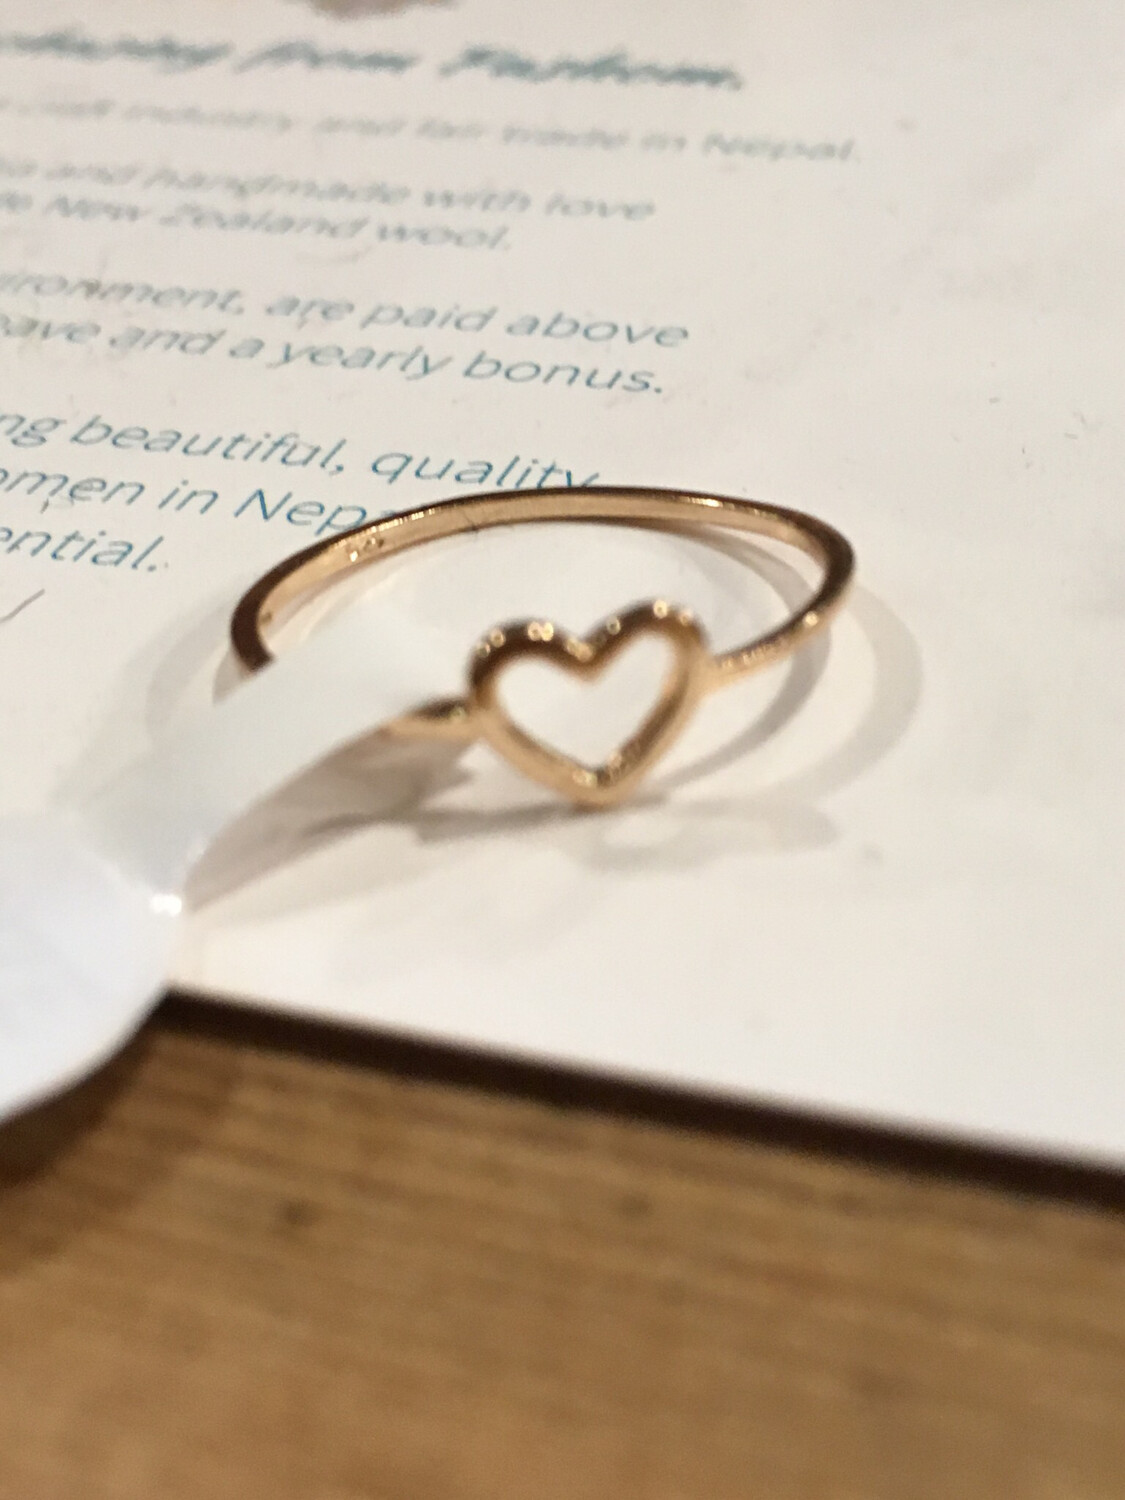 Small Heart Ring